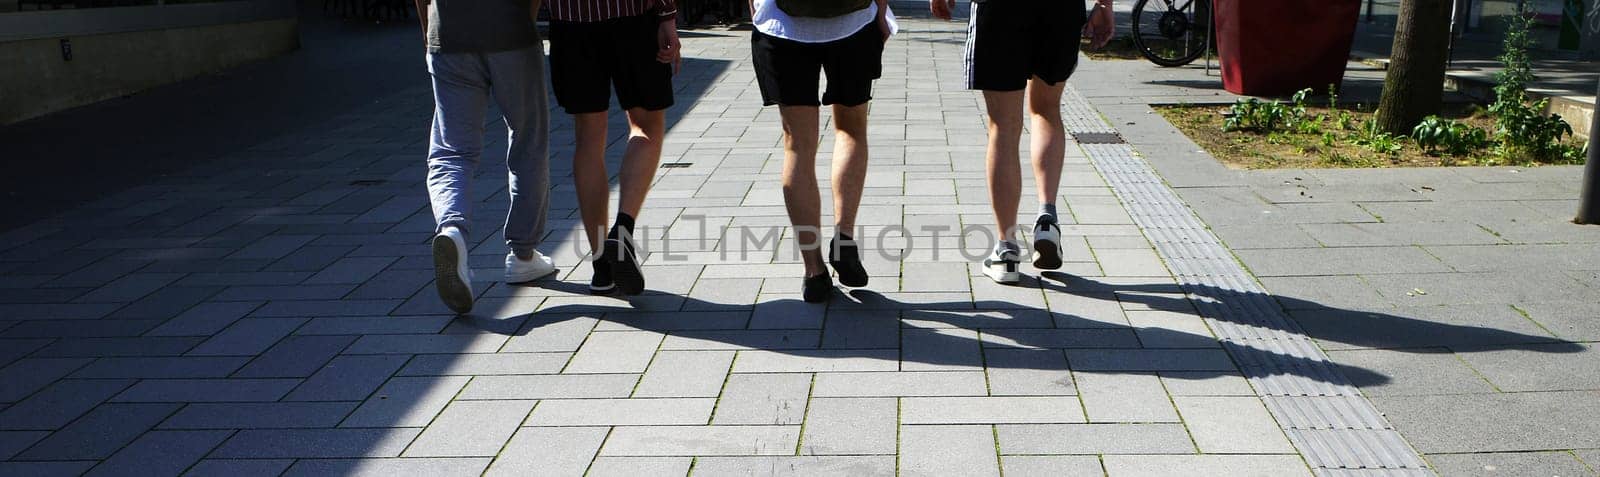 The legs of four male friends. They walk on a broad boulevard. Three of them have bare legs. Their shadows are visible on the paving stones